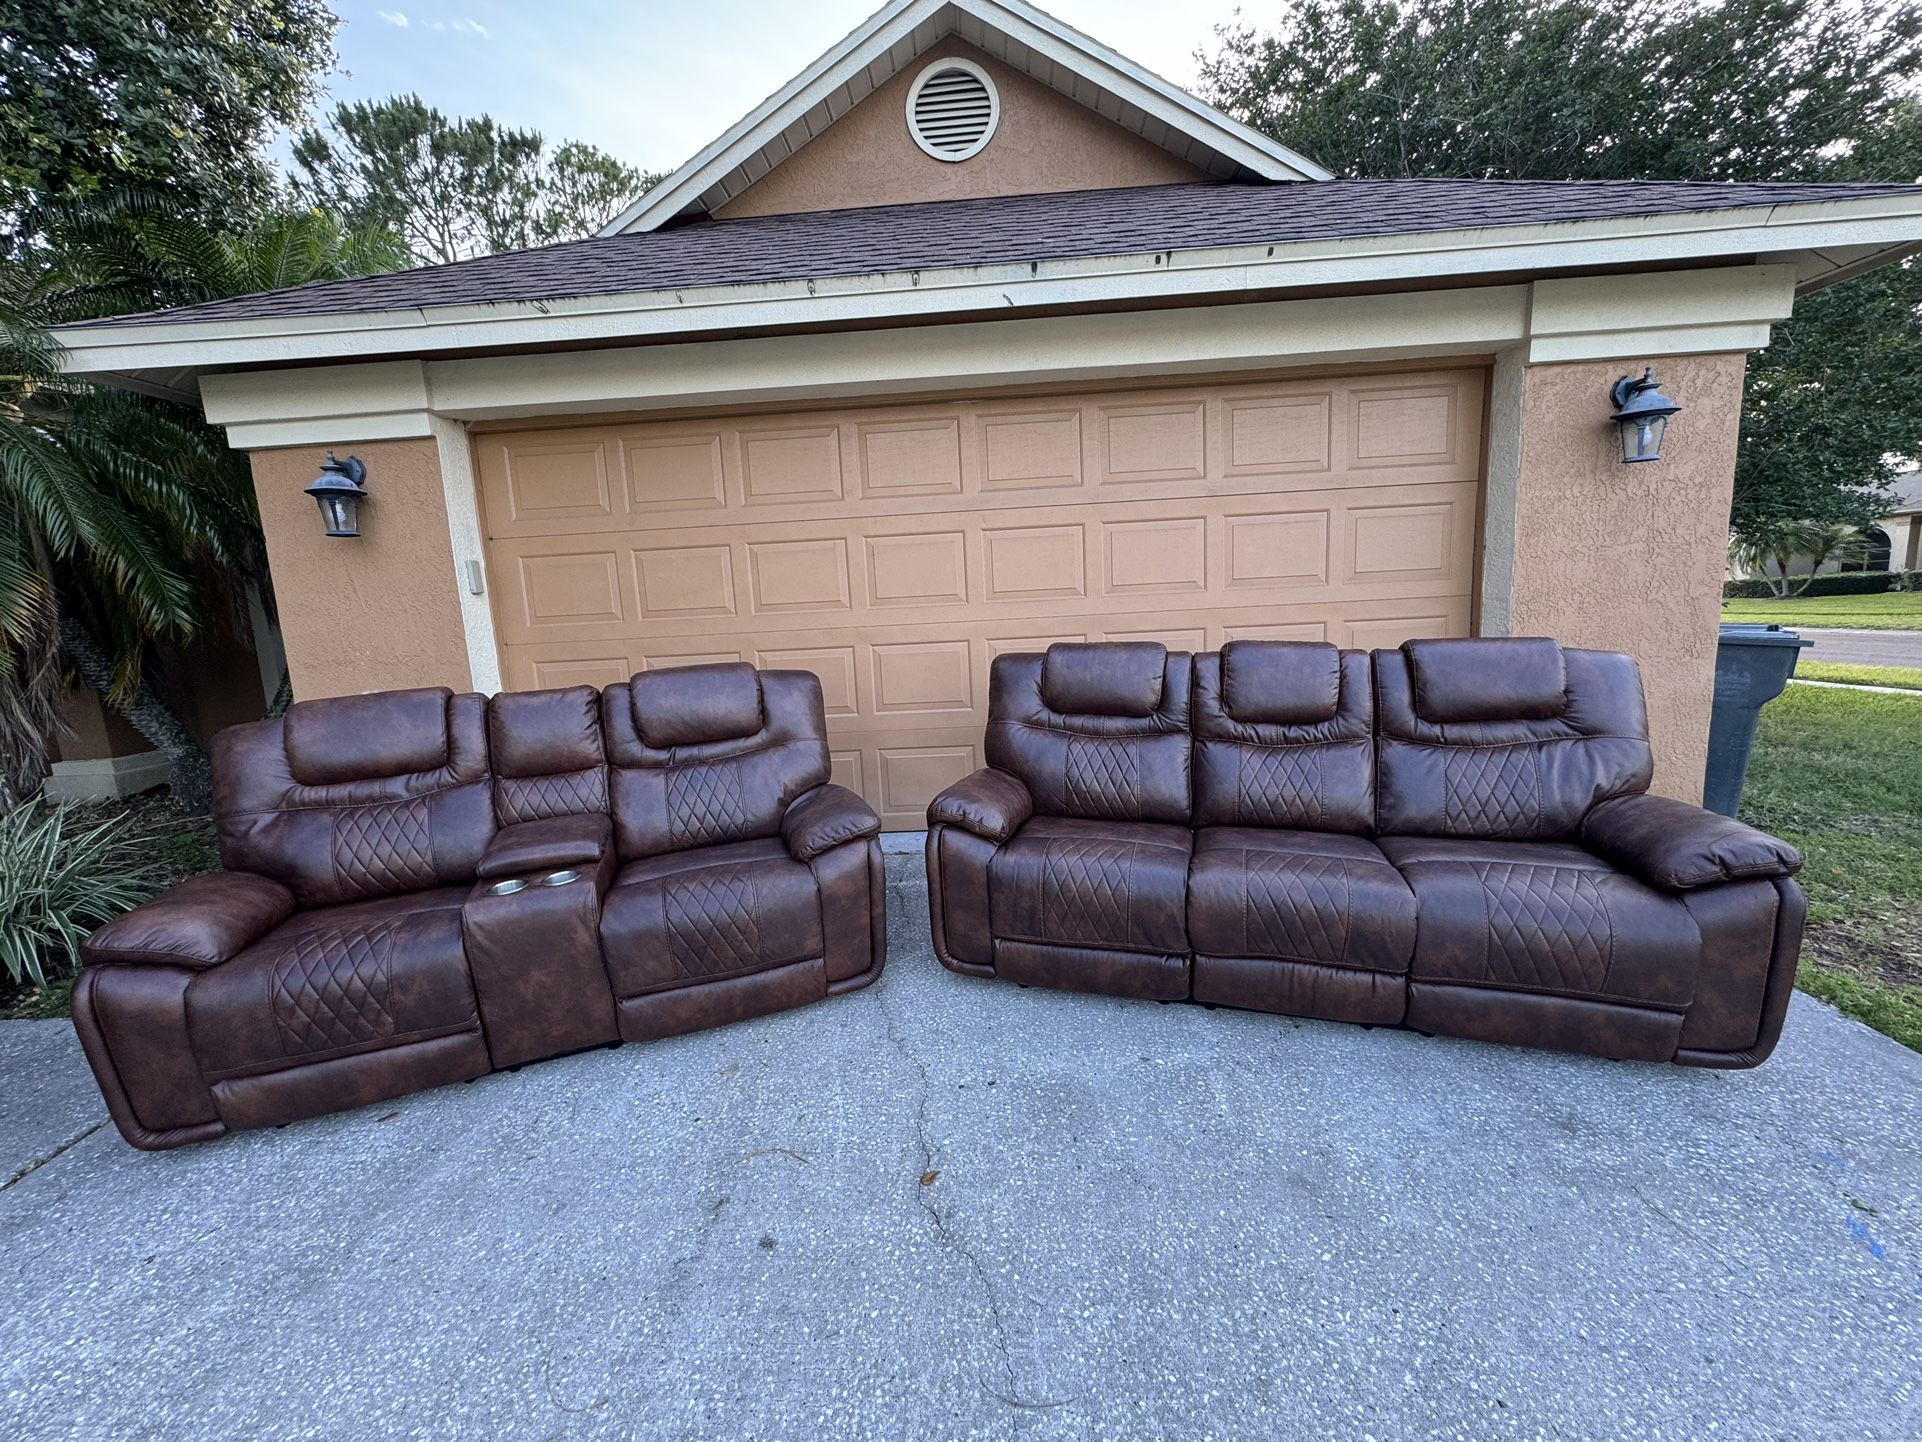 Leather Couch And Loveseat Recliners. Like New Conditions. Delivery Available 